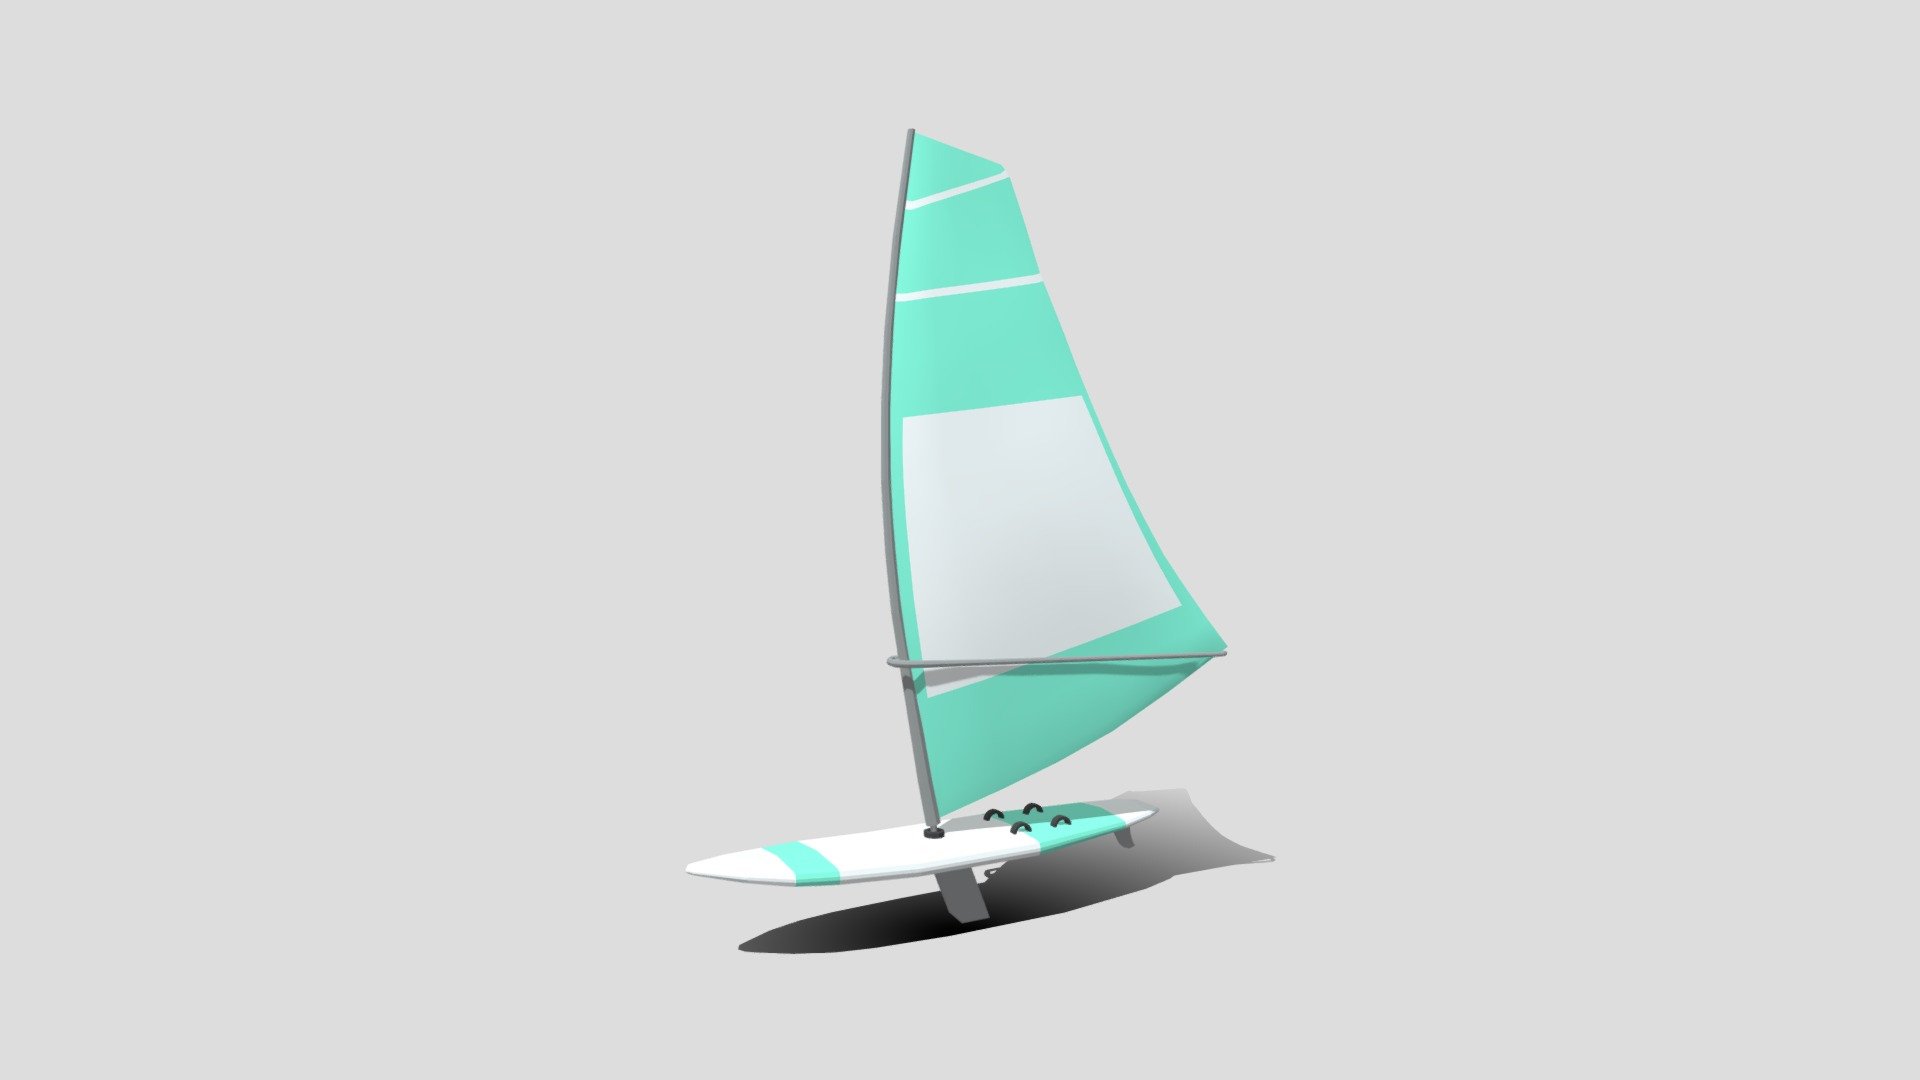 This is a low poly 3D model of a windsurf. The low poly windsurf was modeled and prepared for low-poly style renderings, background, general CG visualization presented as 2 meshes with quads only. The board and the sail are seperate meshes.

Verts : 817 Faces : 759.

The 3D model have simple materials with diffuse colors.

No ring, maps and no UVW mapping is available.

The original file was created in blender. You will receive a 3DS, OBJ, FBX, blend, DAE, Stl, gLTF.

All preview images were rendered with Blender Cycles. Product is ready to render out-of-the-box. Please note that the lights, cameras, and background is only included in the .blend file. The model is clean and alone in the other provided files, centred at origin and has real-world scale 3d model